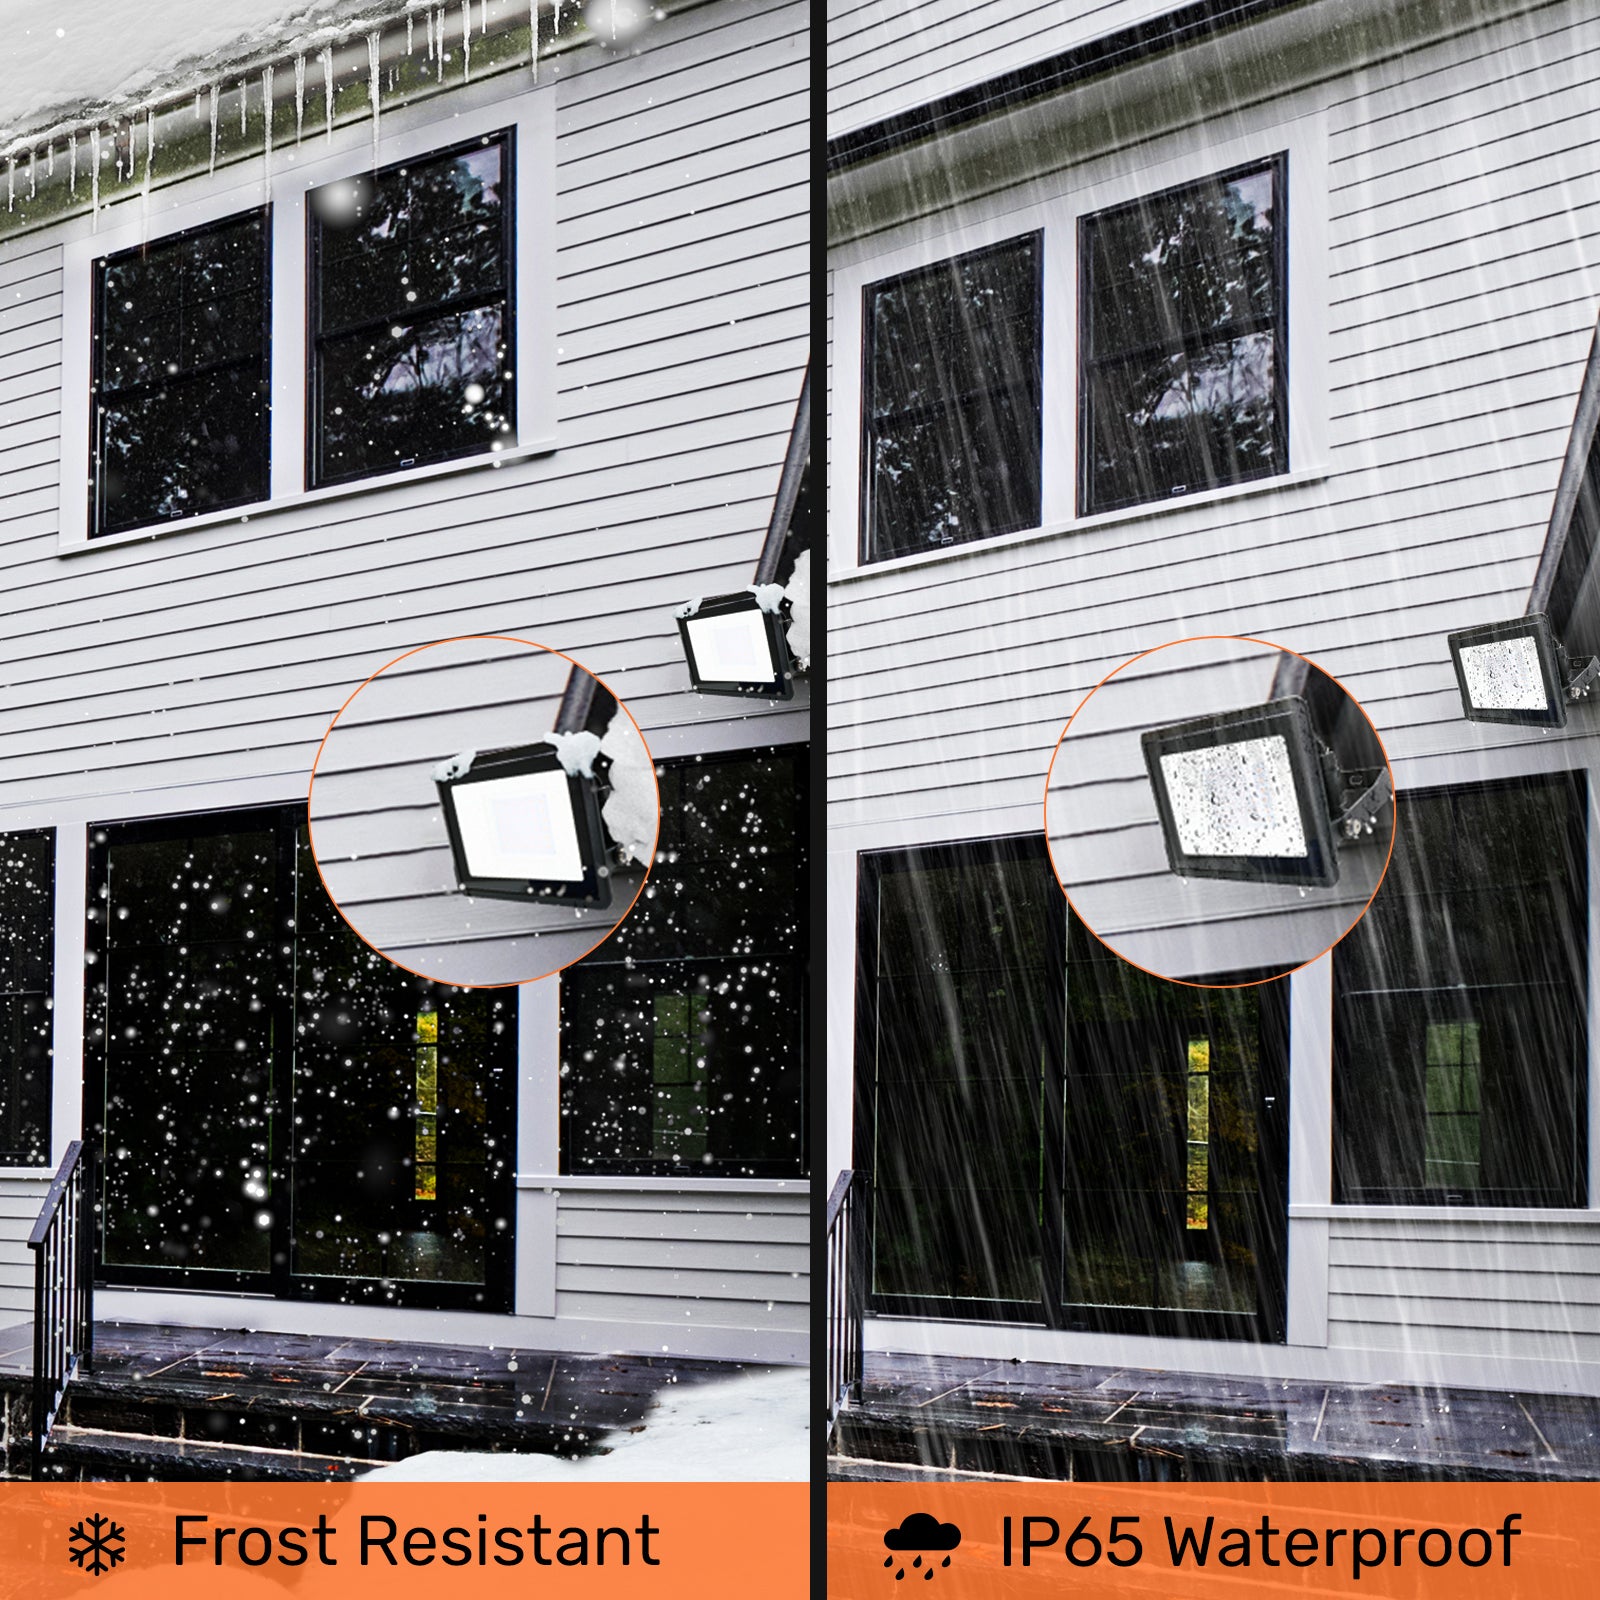 100W, LED Floodlights, 10000 Lumens, 6500K Day Light, Non-Dimmable Spotlights